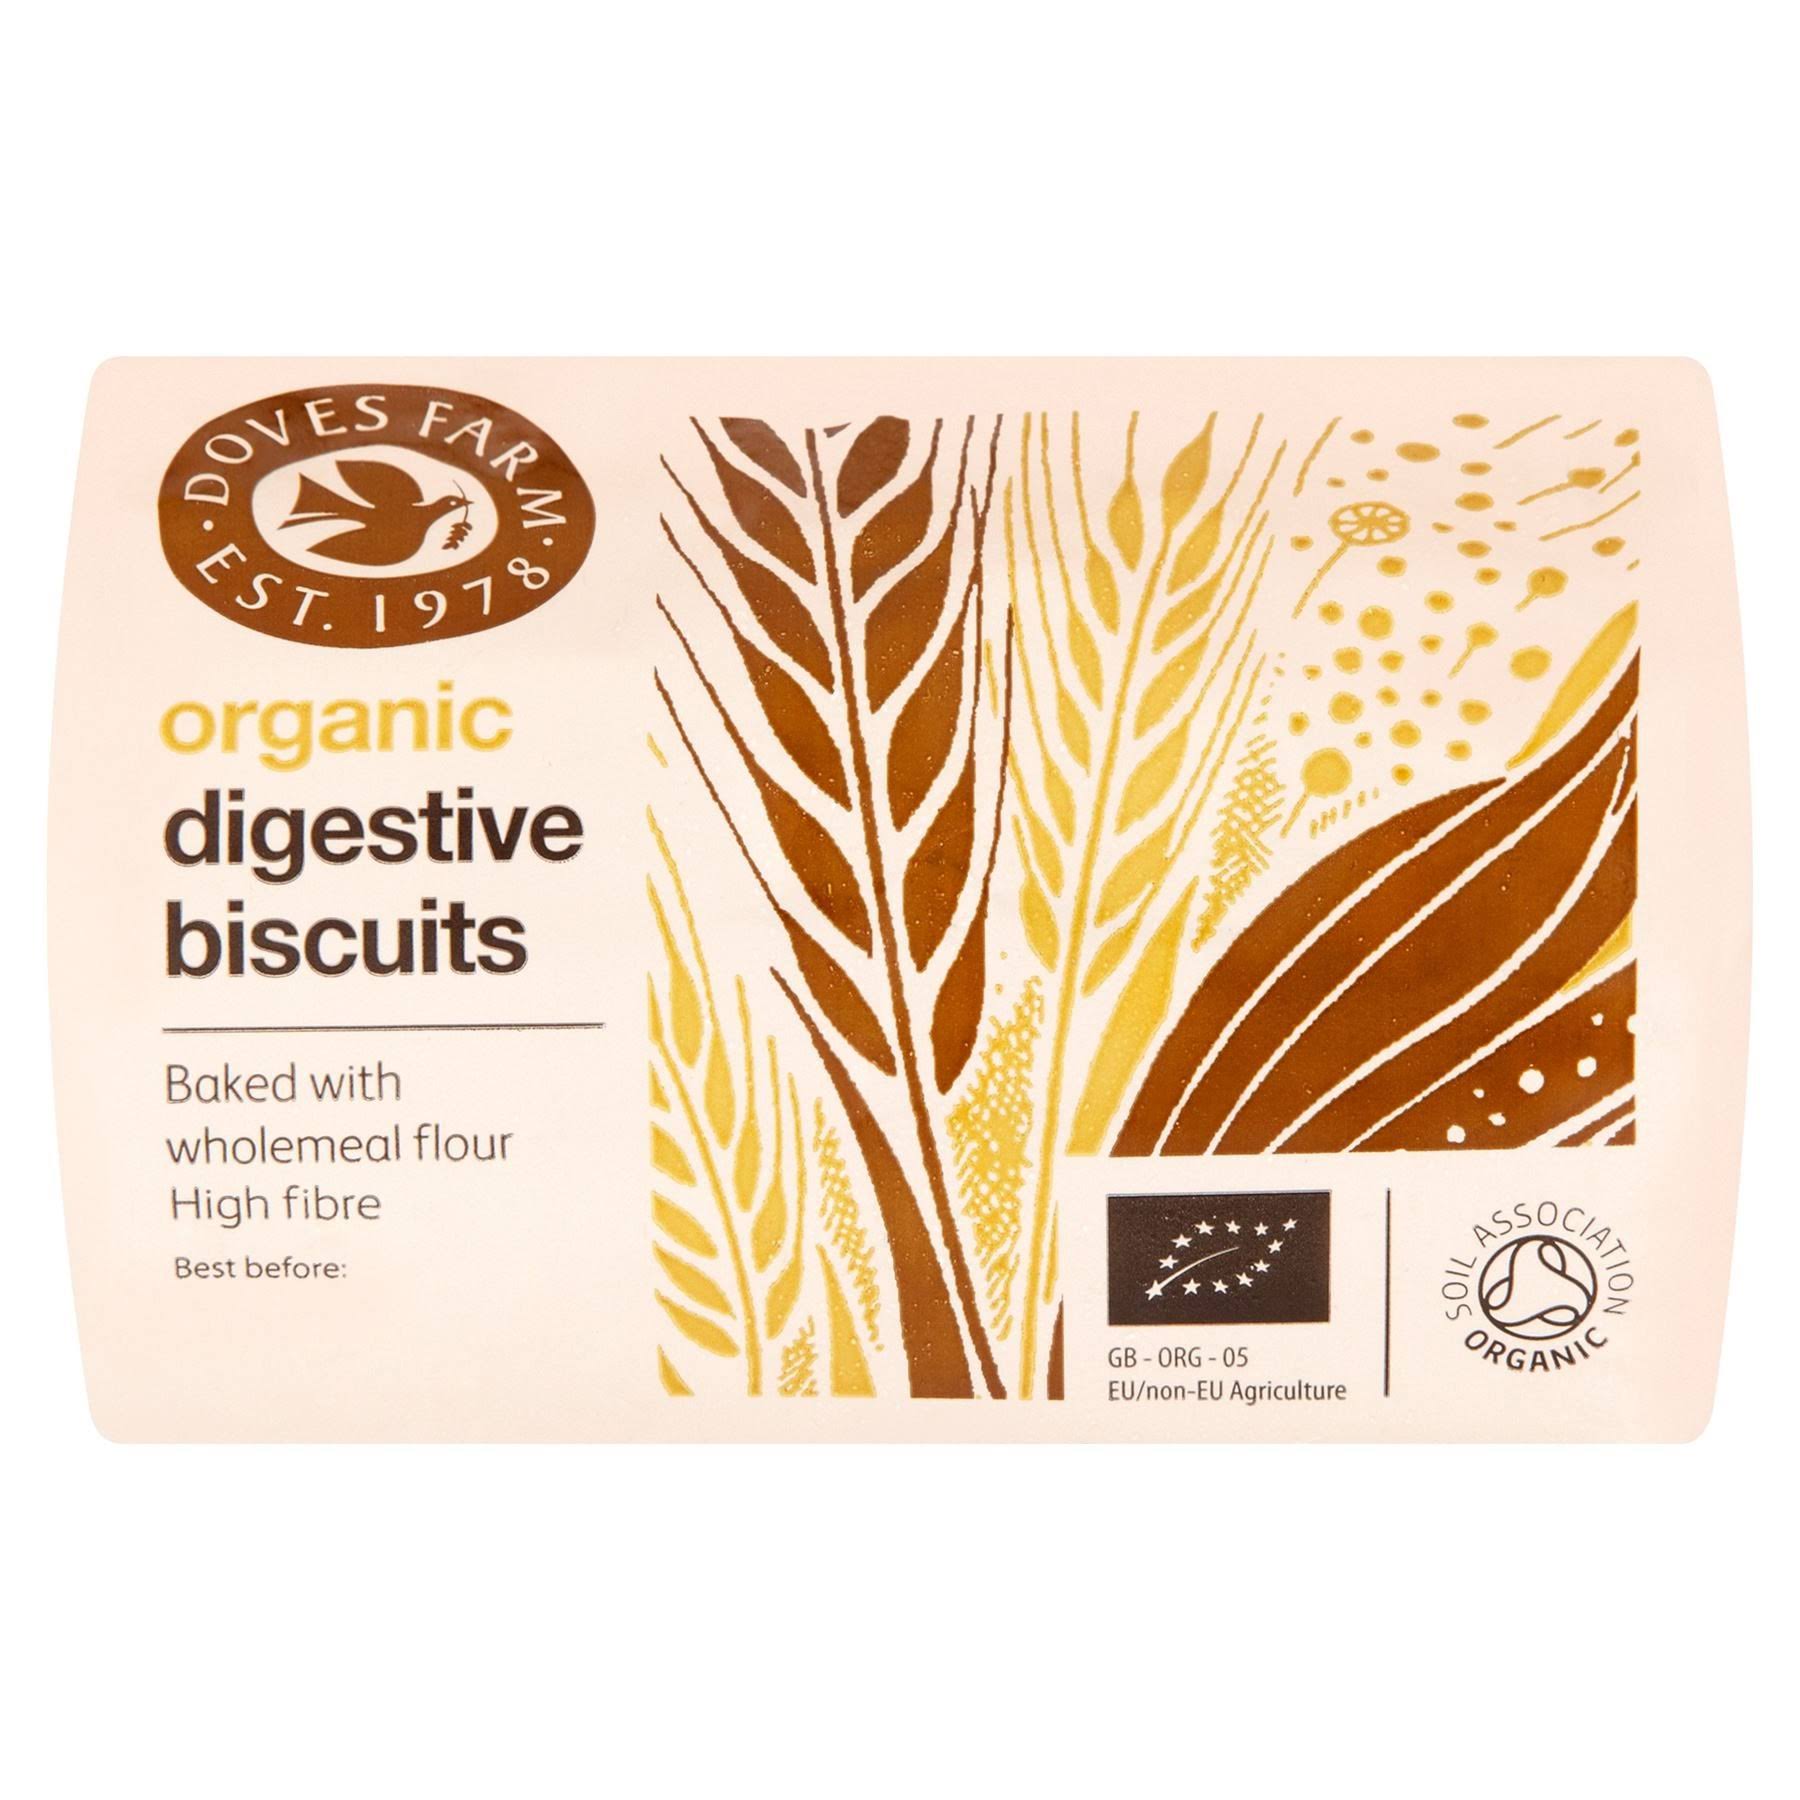 Doves Farm - Organic Digestive Biscuits 200g